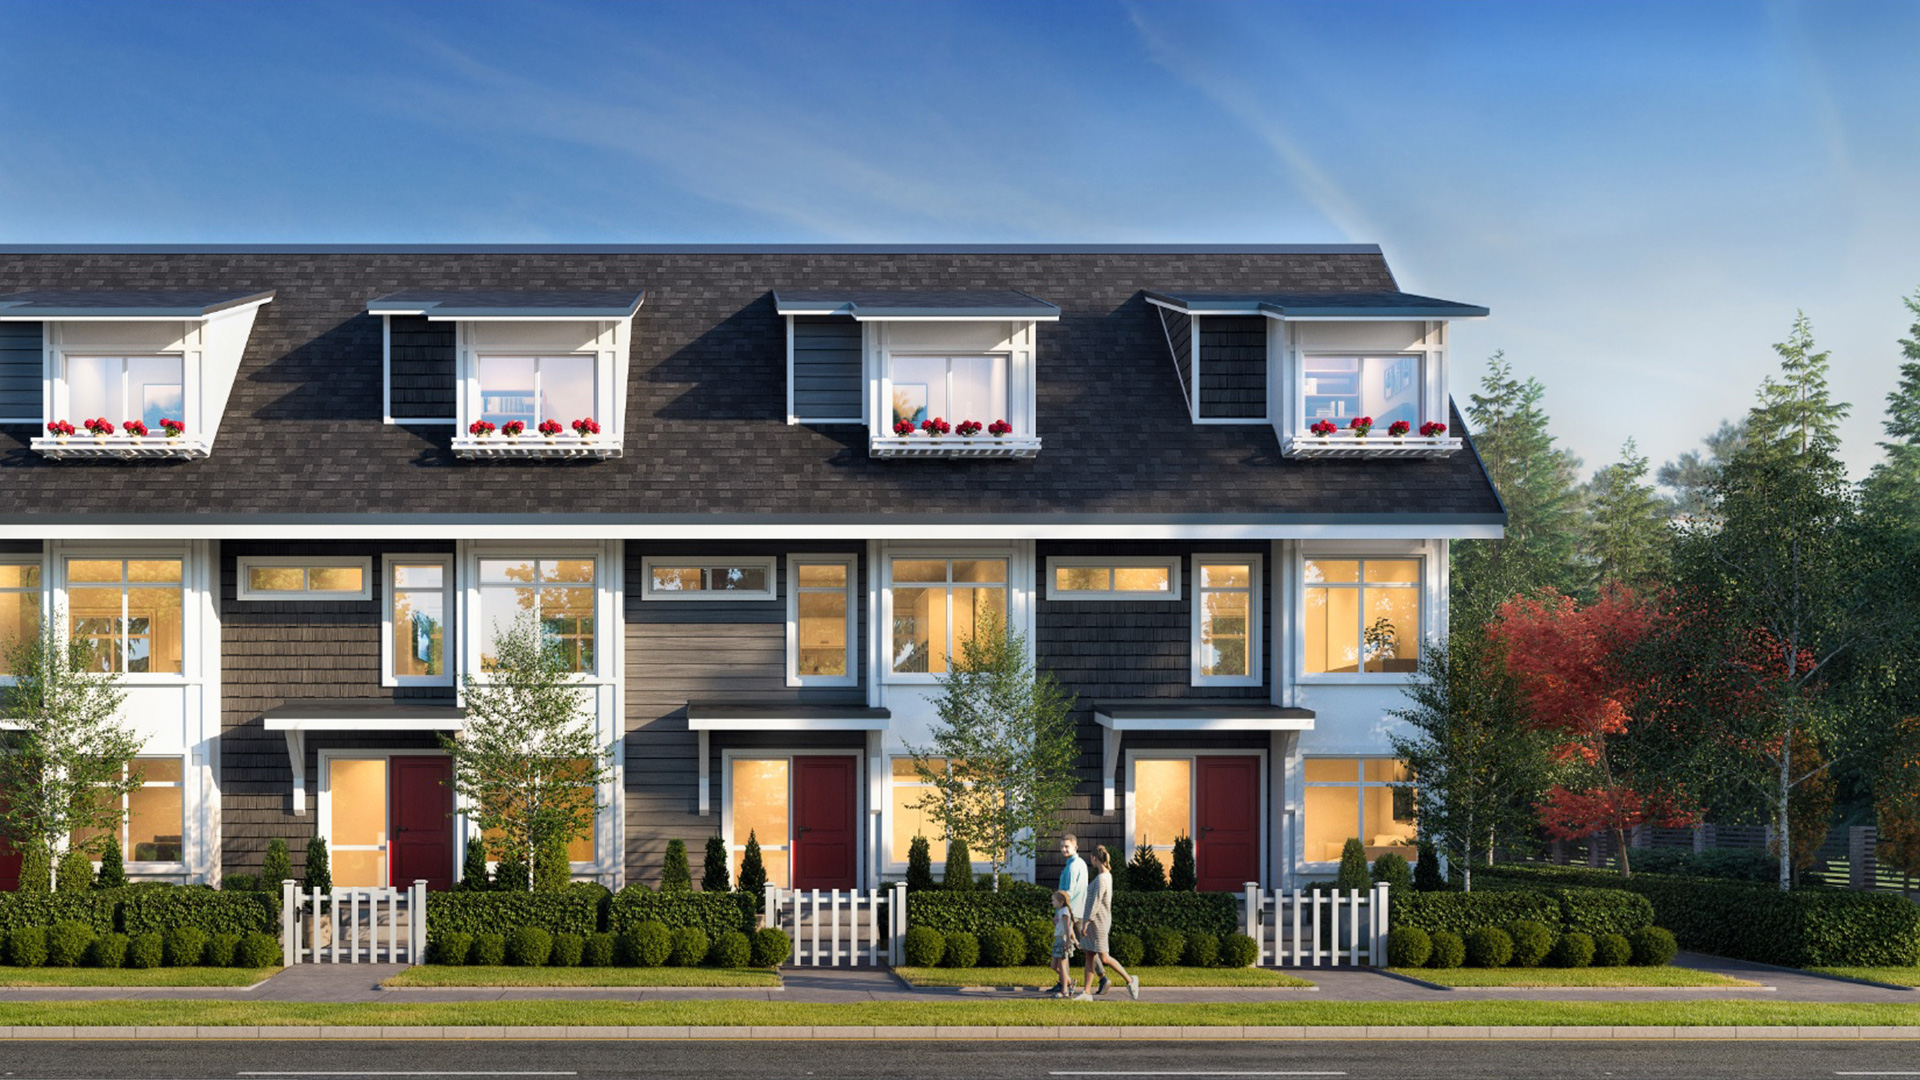 A collection of 42 family-size Newton townhomes with 2- to 4-bedroom floorplans.